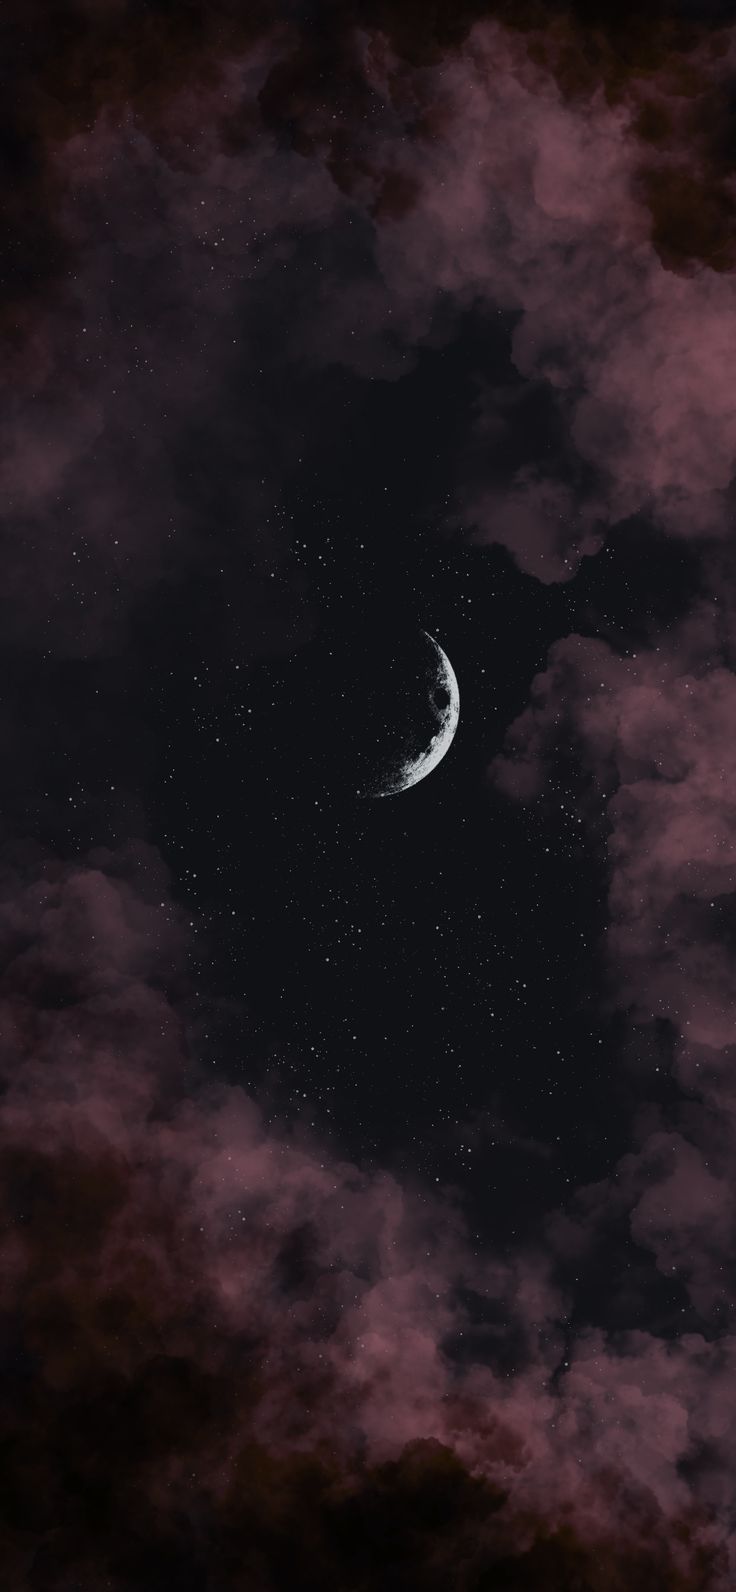 A moon and clouds in the sky - Moon